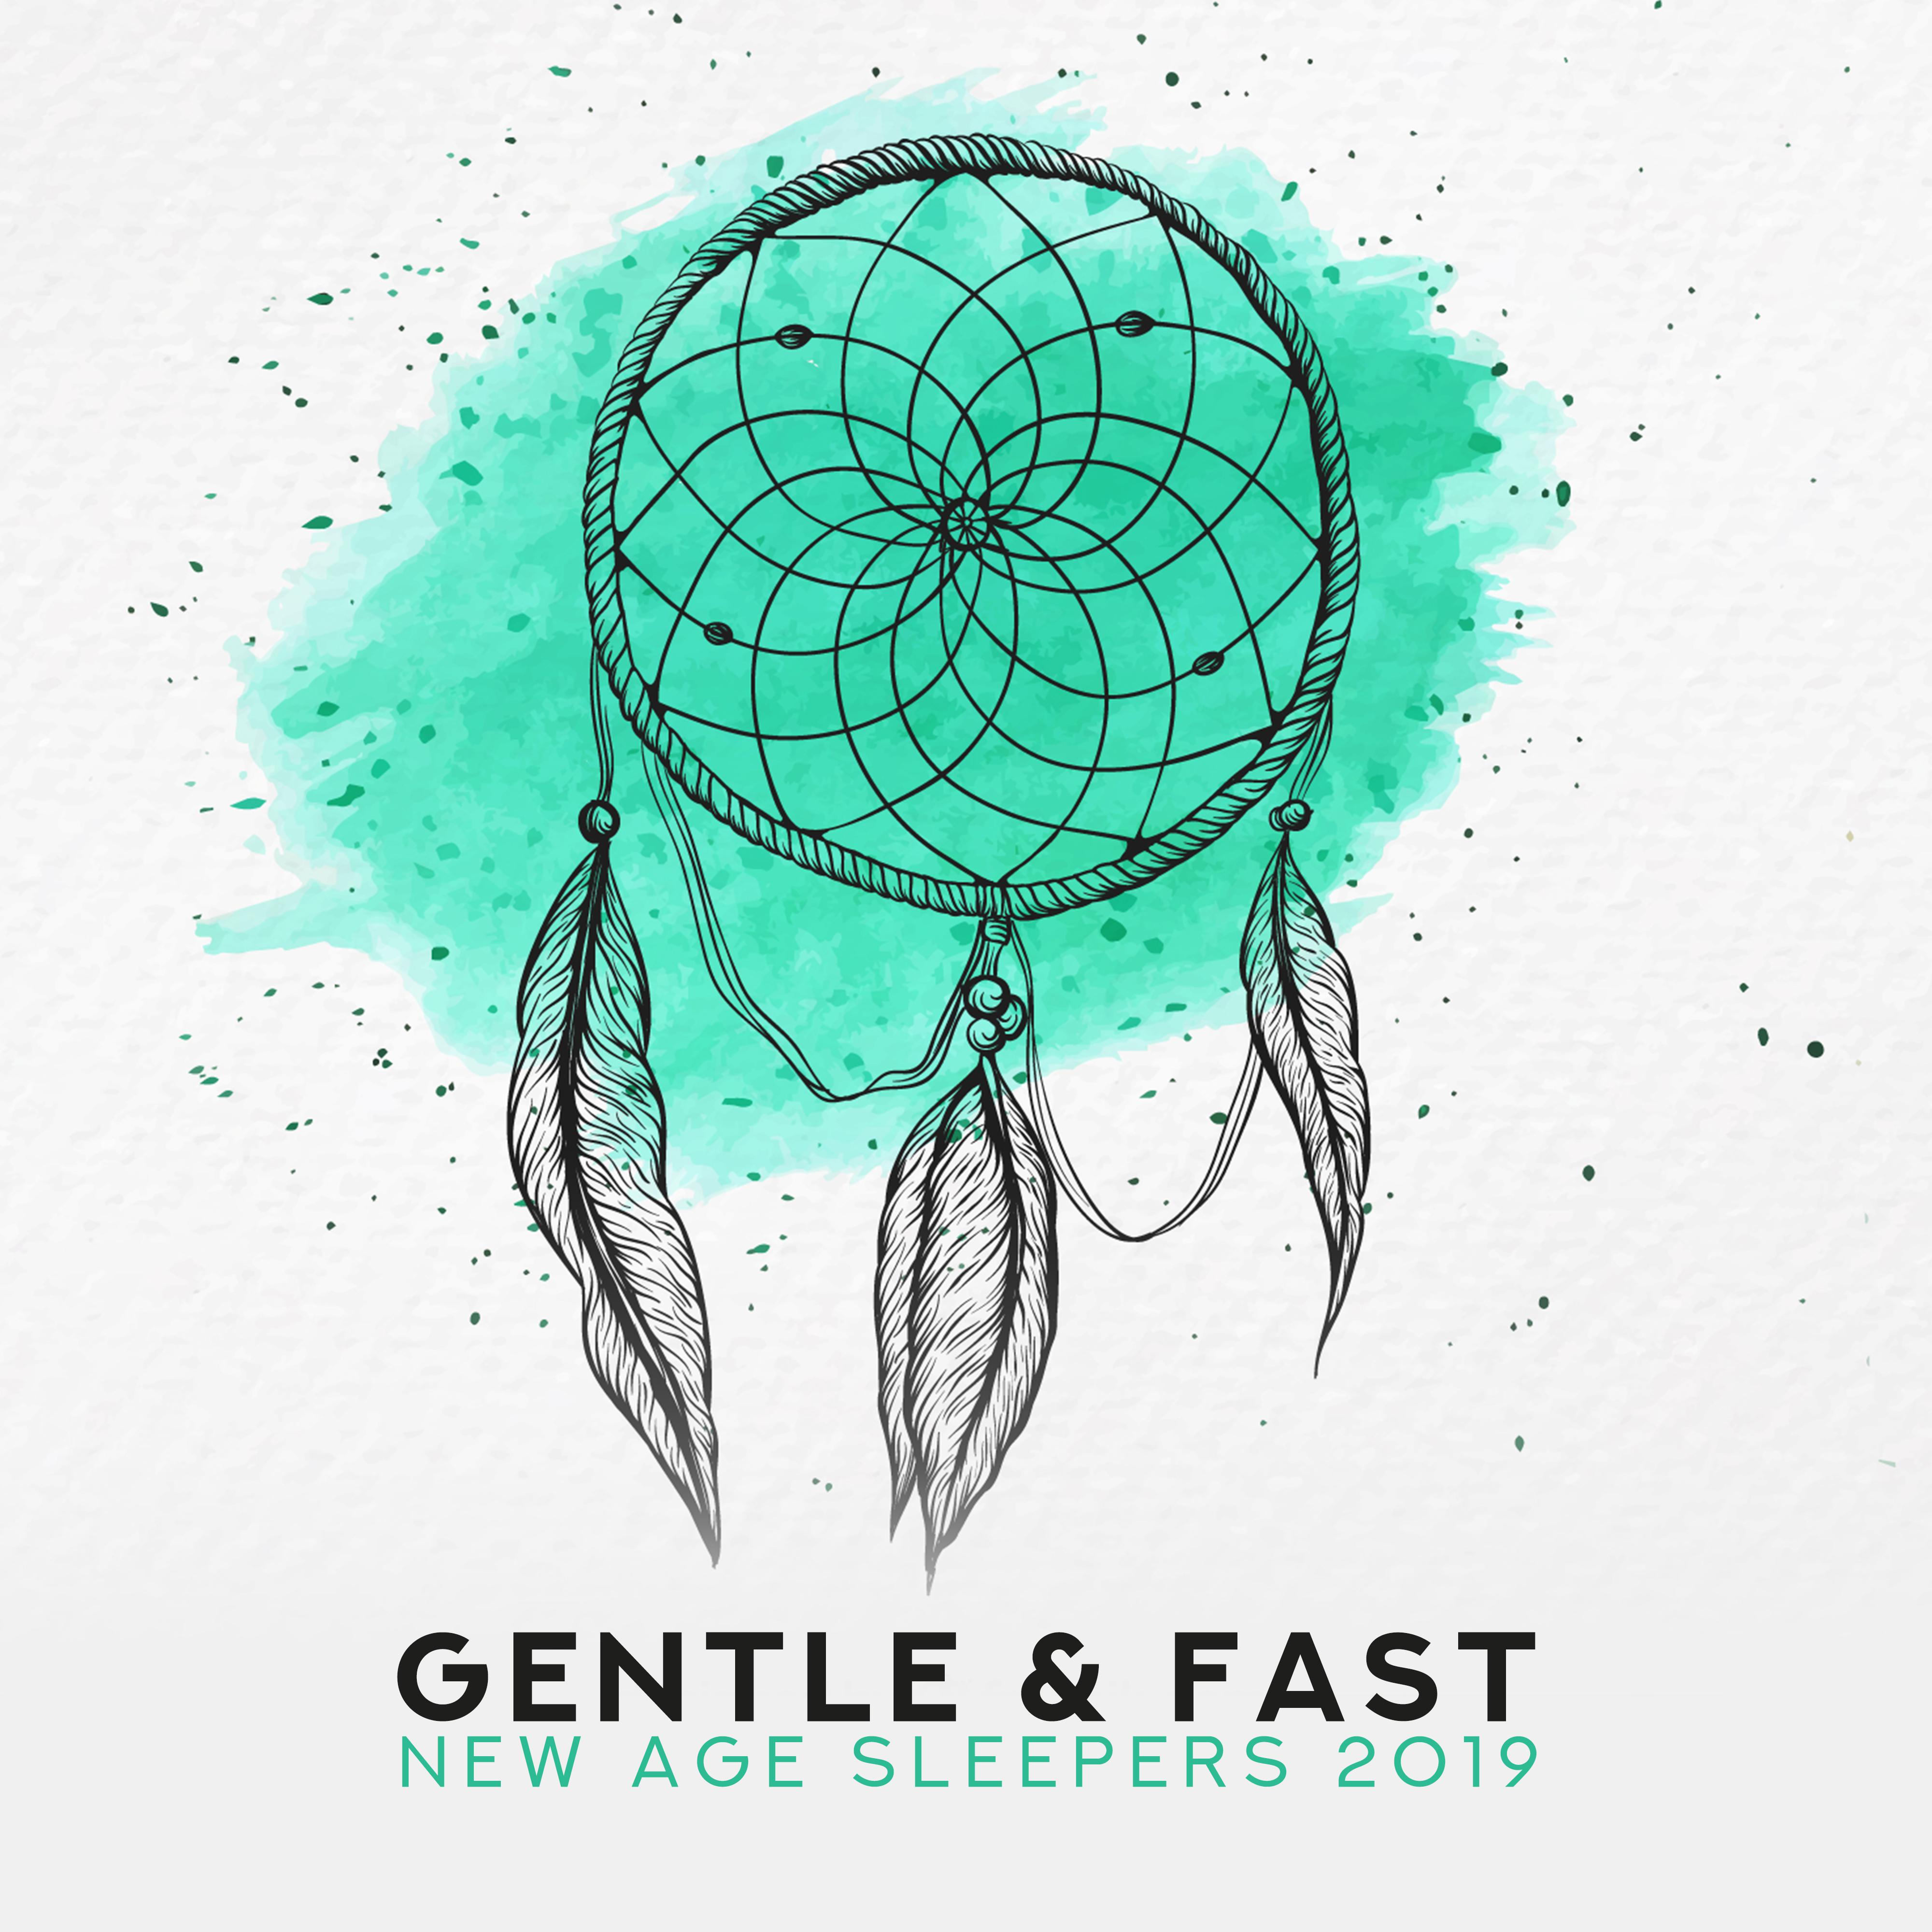 Gentle & Fast New Age Sleepers 2019